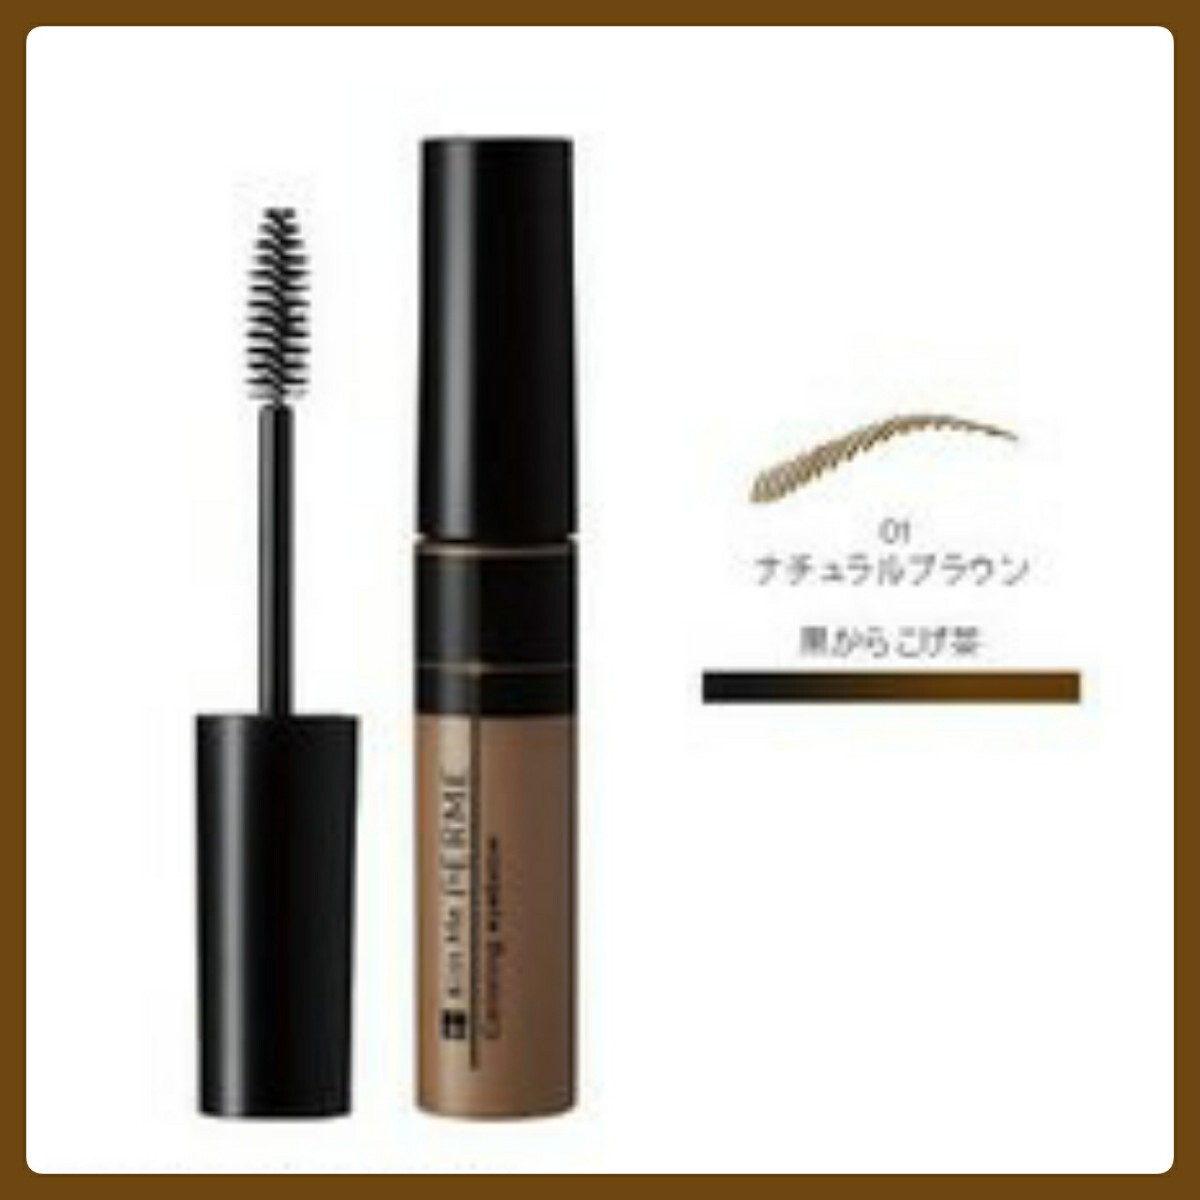  beautiful goods * Kiss mi-ferum coloring eyebrows *01 natural Brown . for mascara * brush type * postage 120 jpy *. hot water .....* fragrance free 